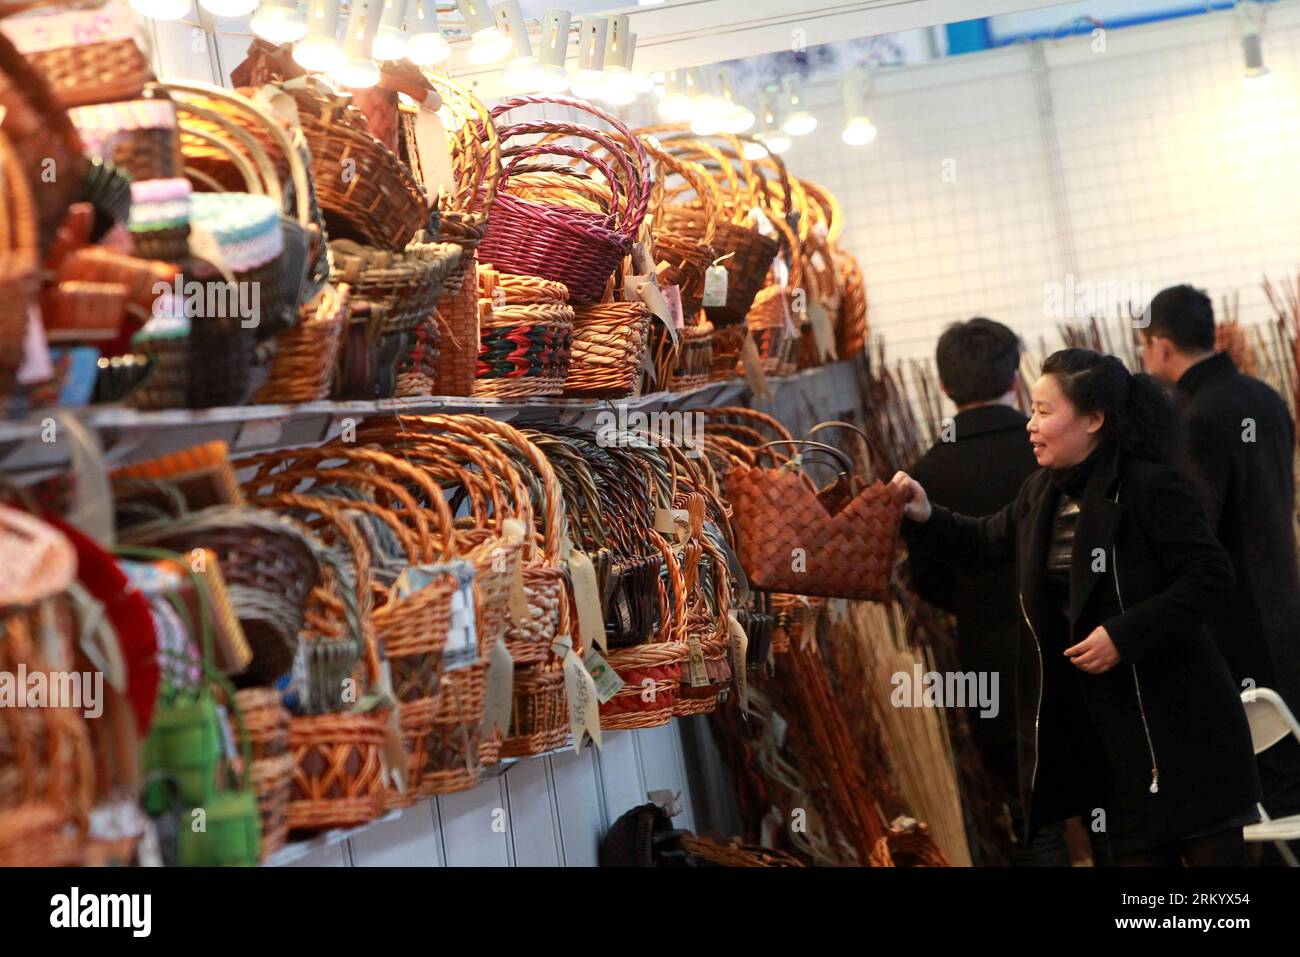 Bildnummer: 59286375  Datum: 01.03.2013  Copyright: imago/Xinhua (130301) -- SHANGHAI, March 1, 2013 (Xinhua) -- A visitor selects rattan products during the 23th East China Import and Export Fair in east China s Shanghai Municipality, March 1, 2013. The fair, with the participation of more than 3, 500 exhibitors, opened here Friday. (Xinhua/Pei Xin) (yxb) CHINA-SHANGHAI-FAIR(CN) PUBLICATIONxNOTxINxCHN Wirtschaft Messe Exportmesse xas x0x 2013 quer      59286375 Date 01 03 2013 Copyright Imago XINHUA  Shanghai March 1 2013 XINHUA a Visitor selects Rattan Products during The 23th East China Imp Stock Photo